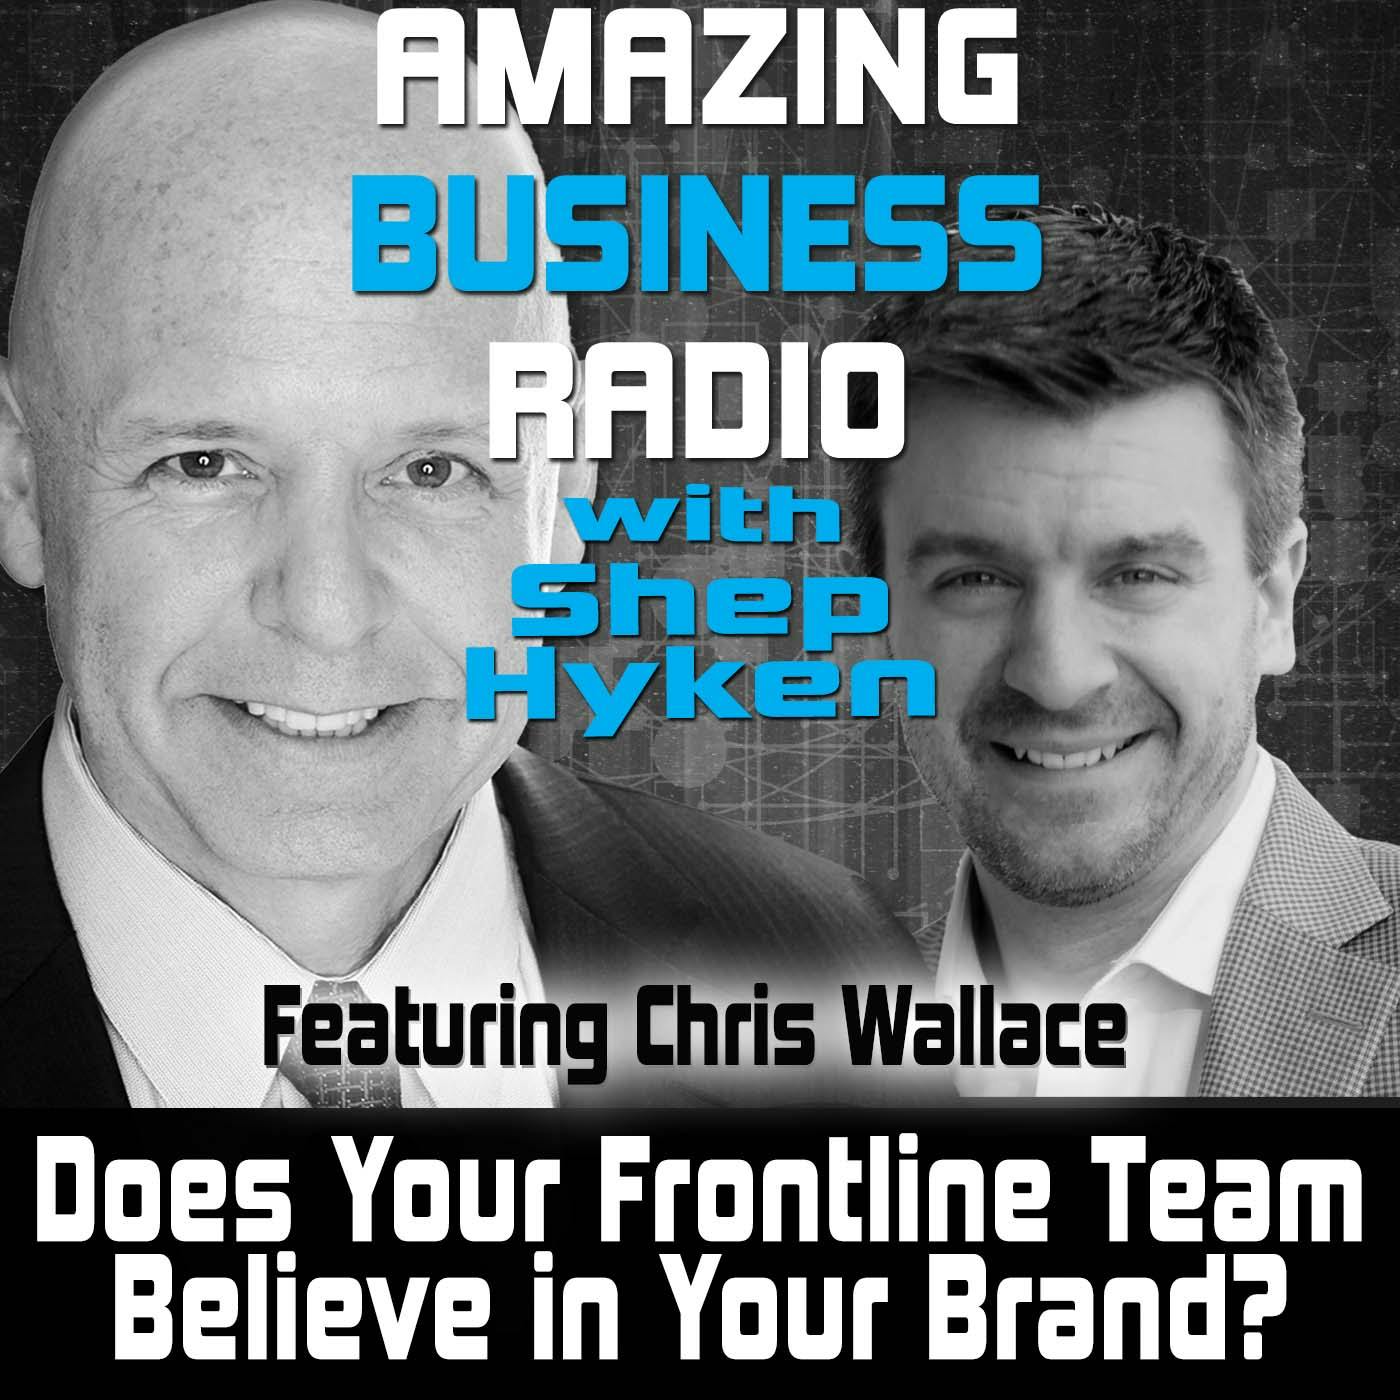 Does Your Frontline Team Believe in Your Brand? Featuring Chris Wallace